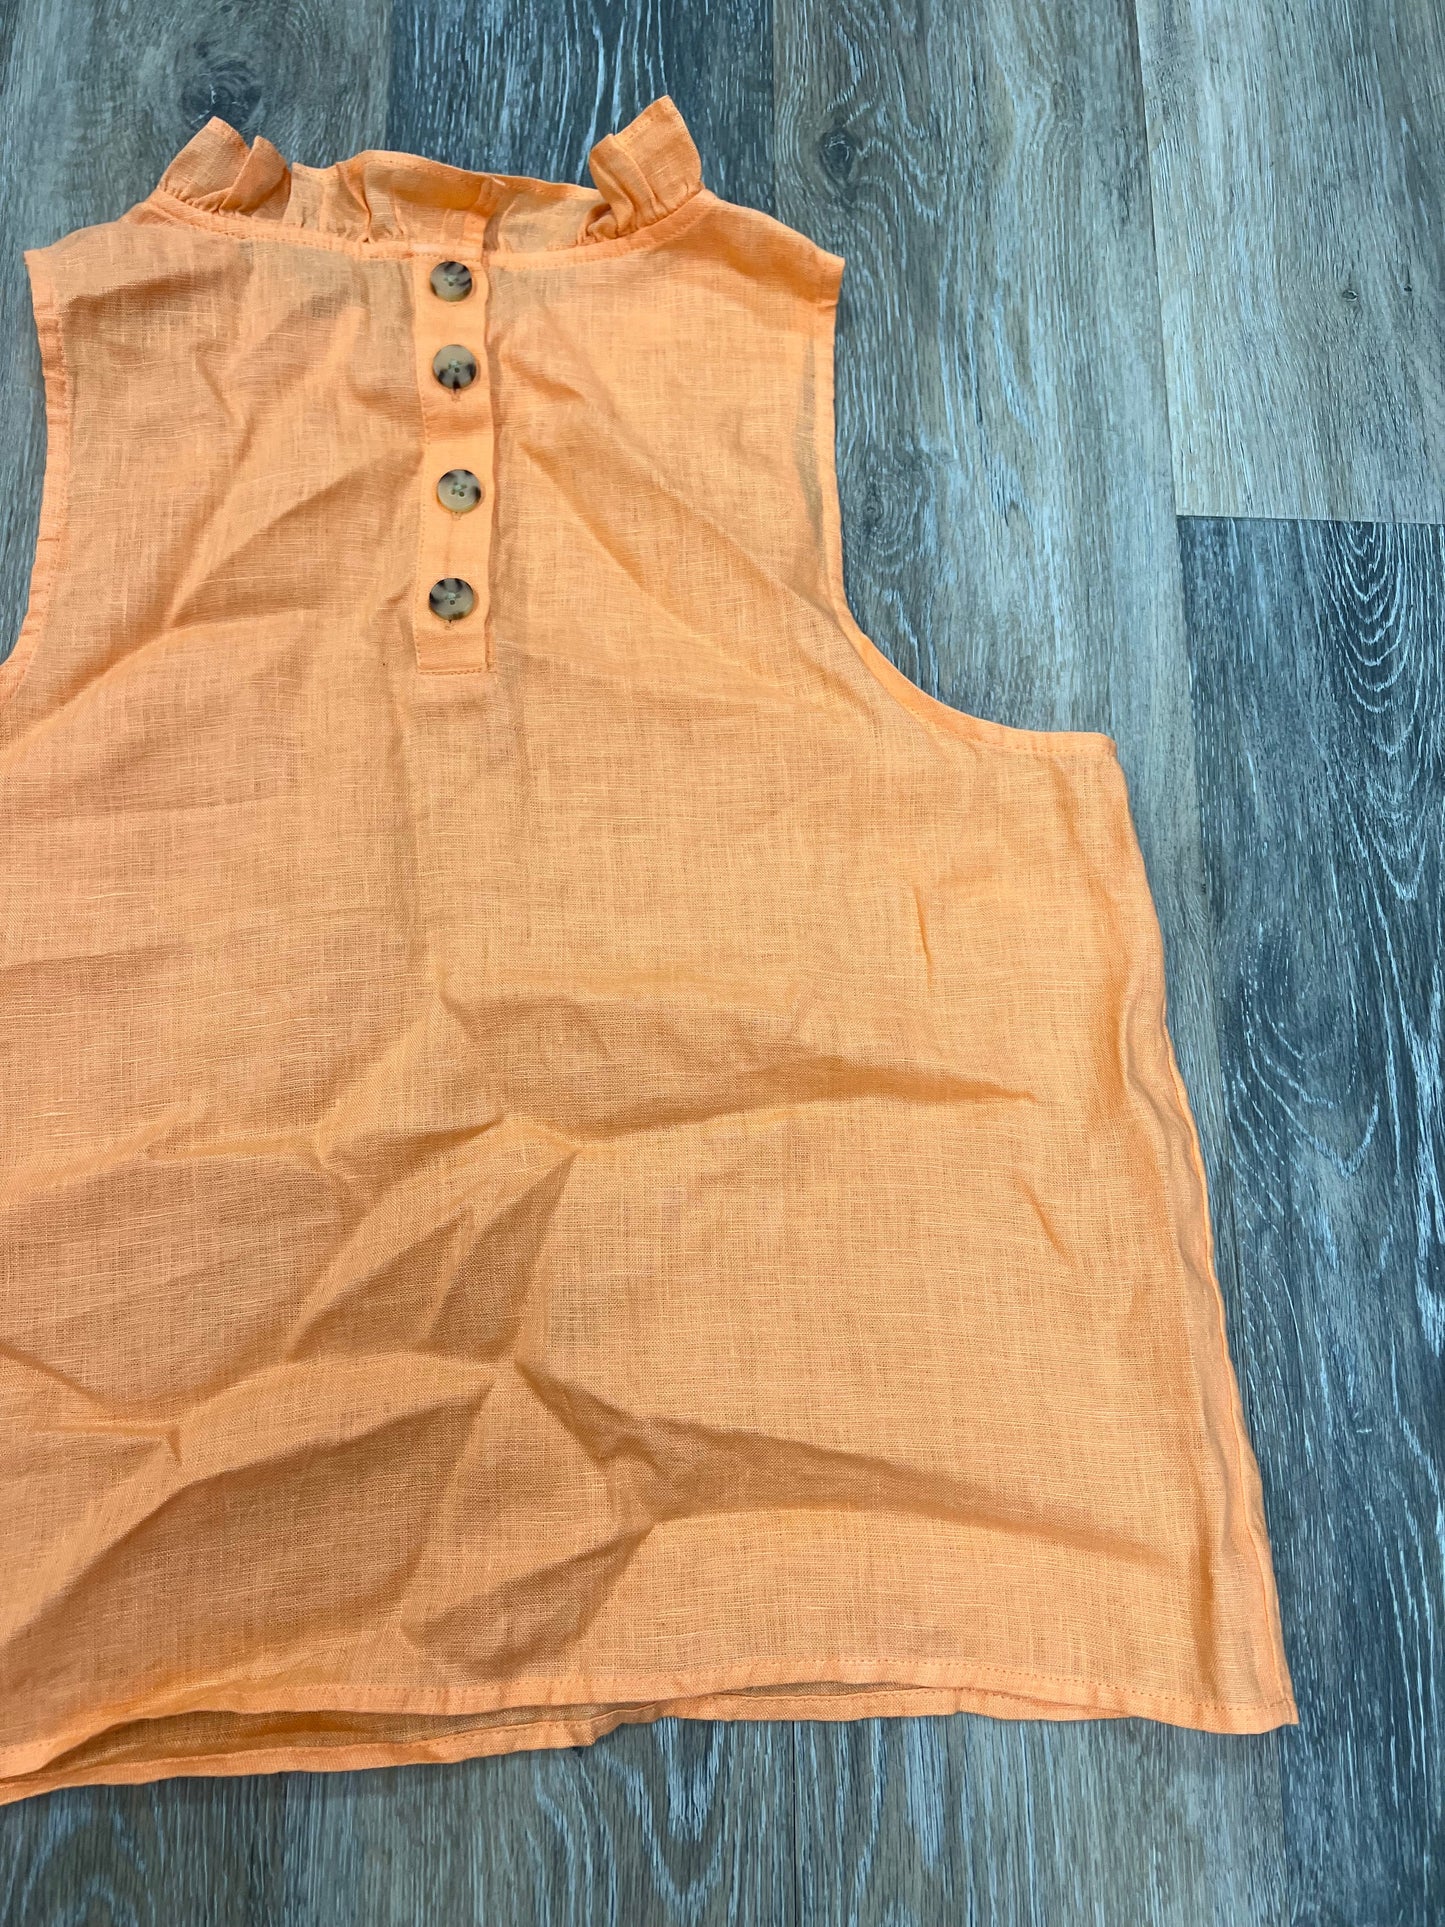 Top Sleeveless By J. Crew  Size: S